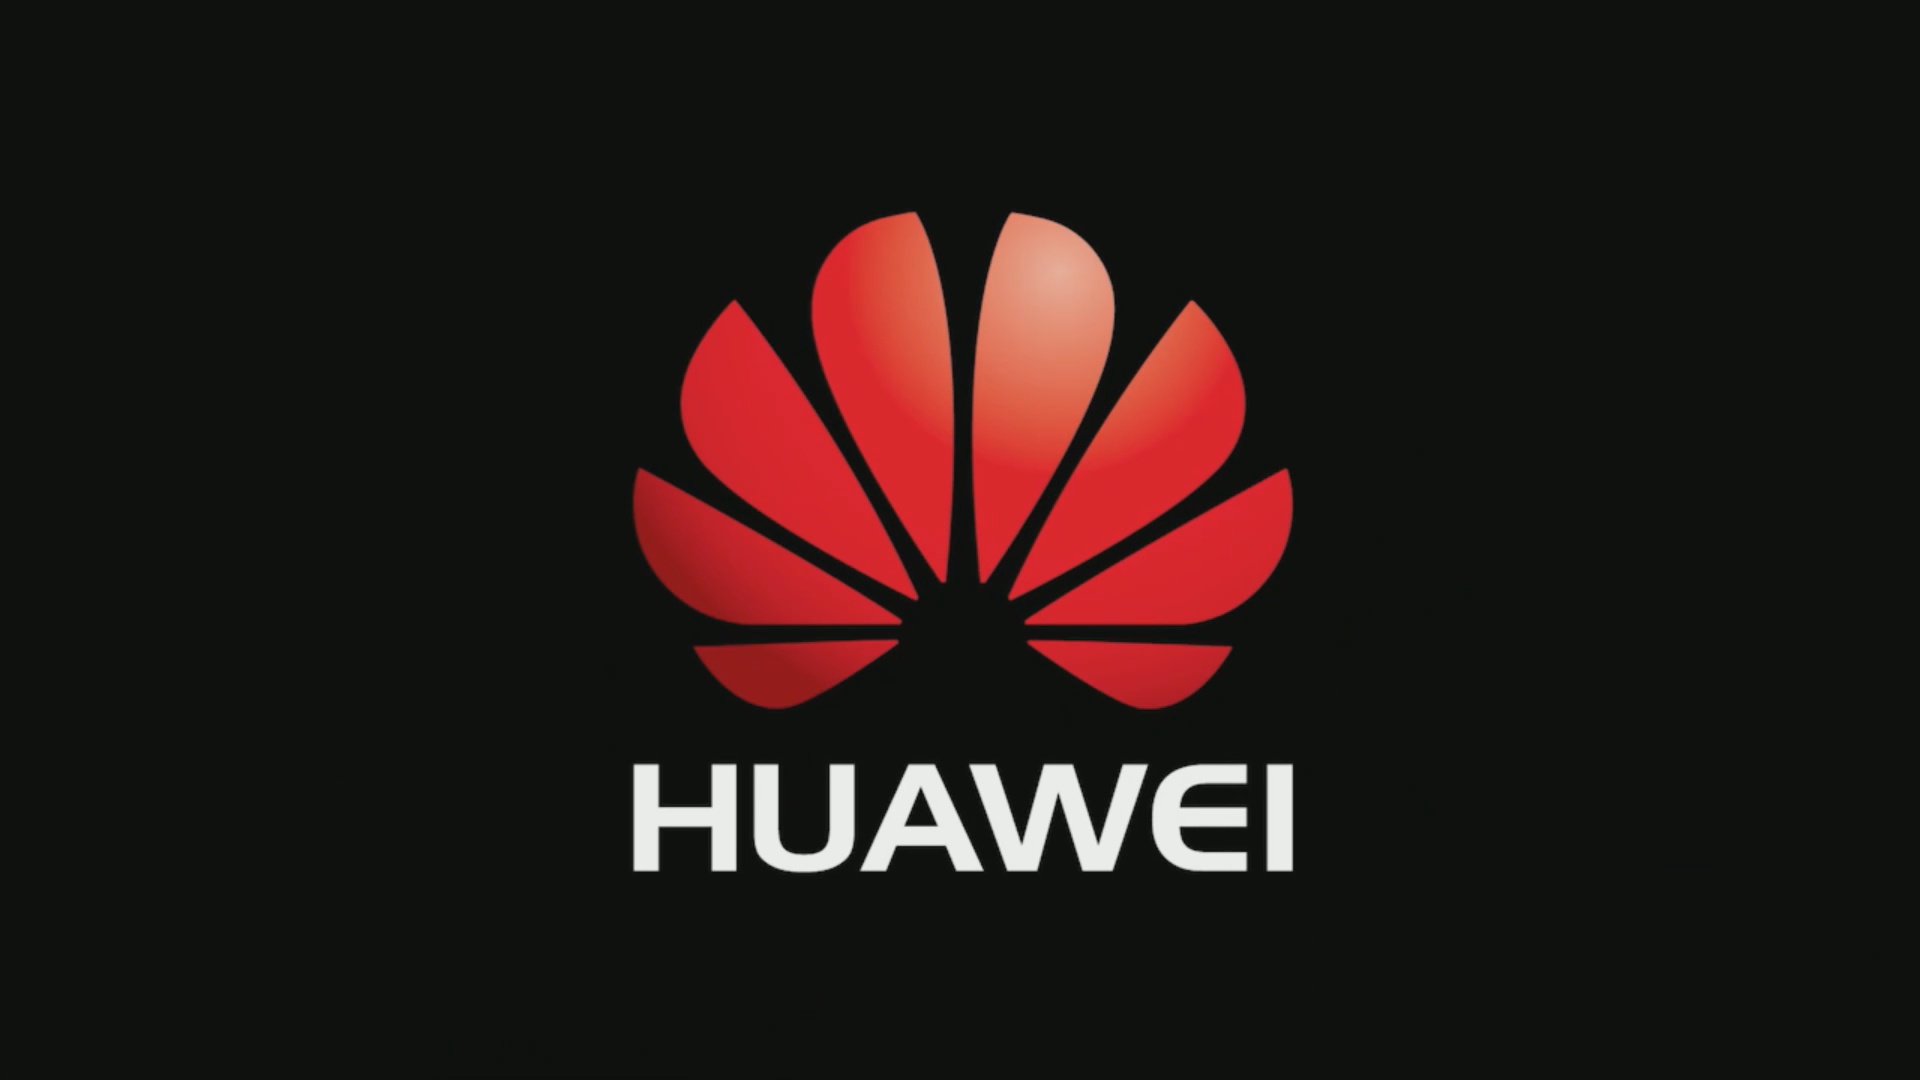 Fixed - Sound Not Works on Huawei P smart